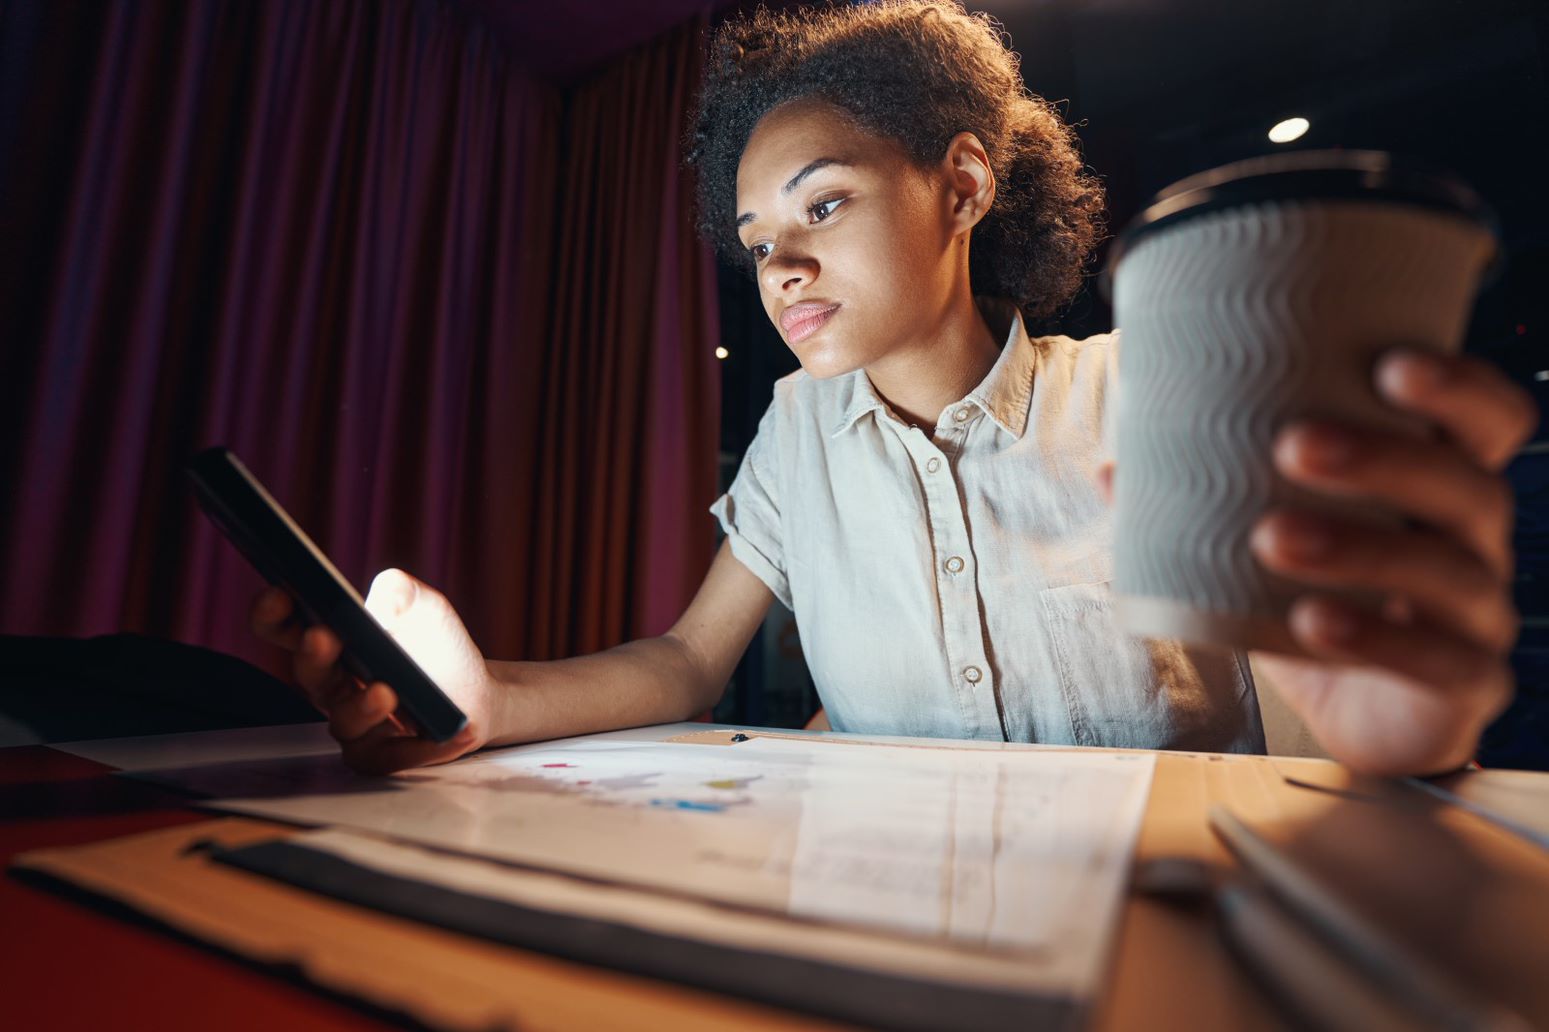 A young person sitting at a desk while looking at her phone and holding a cup of coffee while reading about how to prepare for the upcoming multifamily market outlook